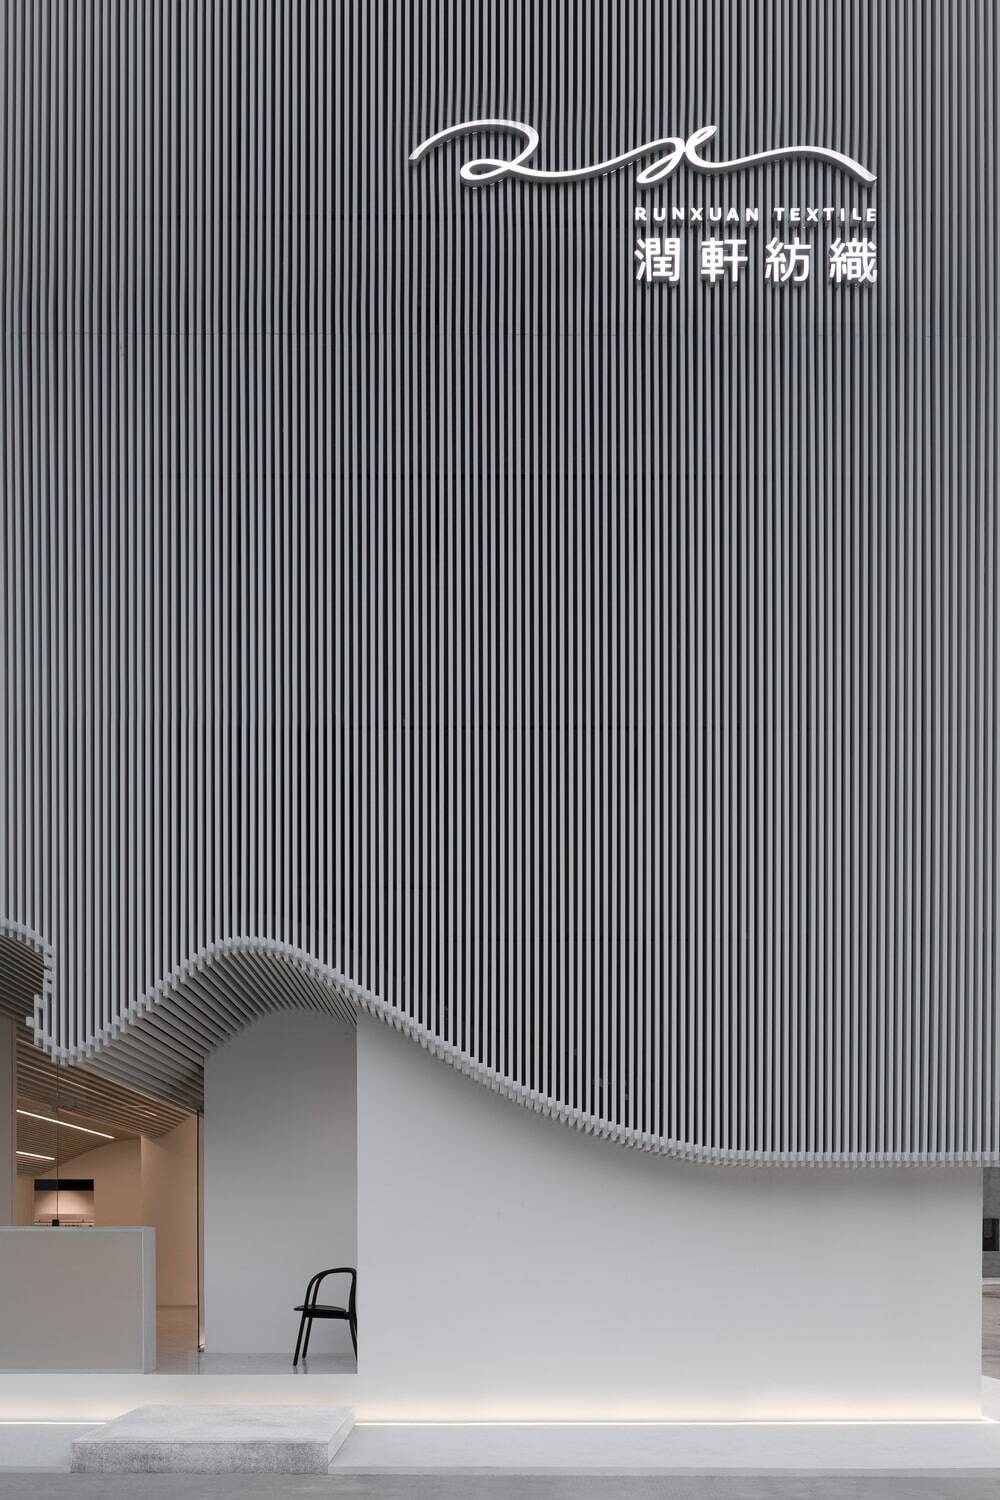 Runxuan Textile Office - A Pure White Space Filled with Rhythm